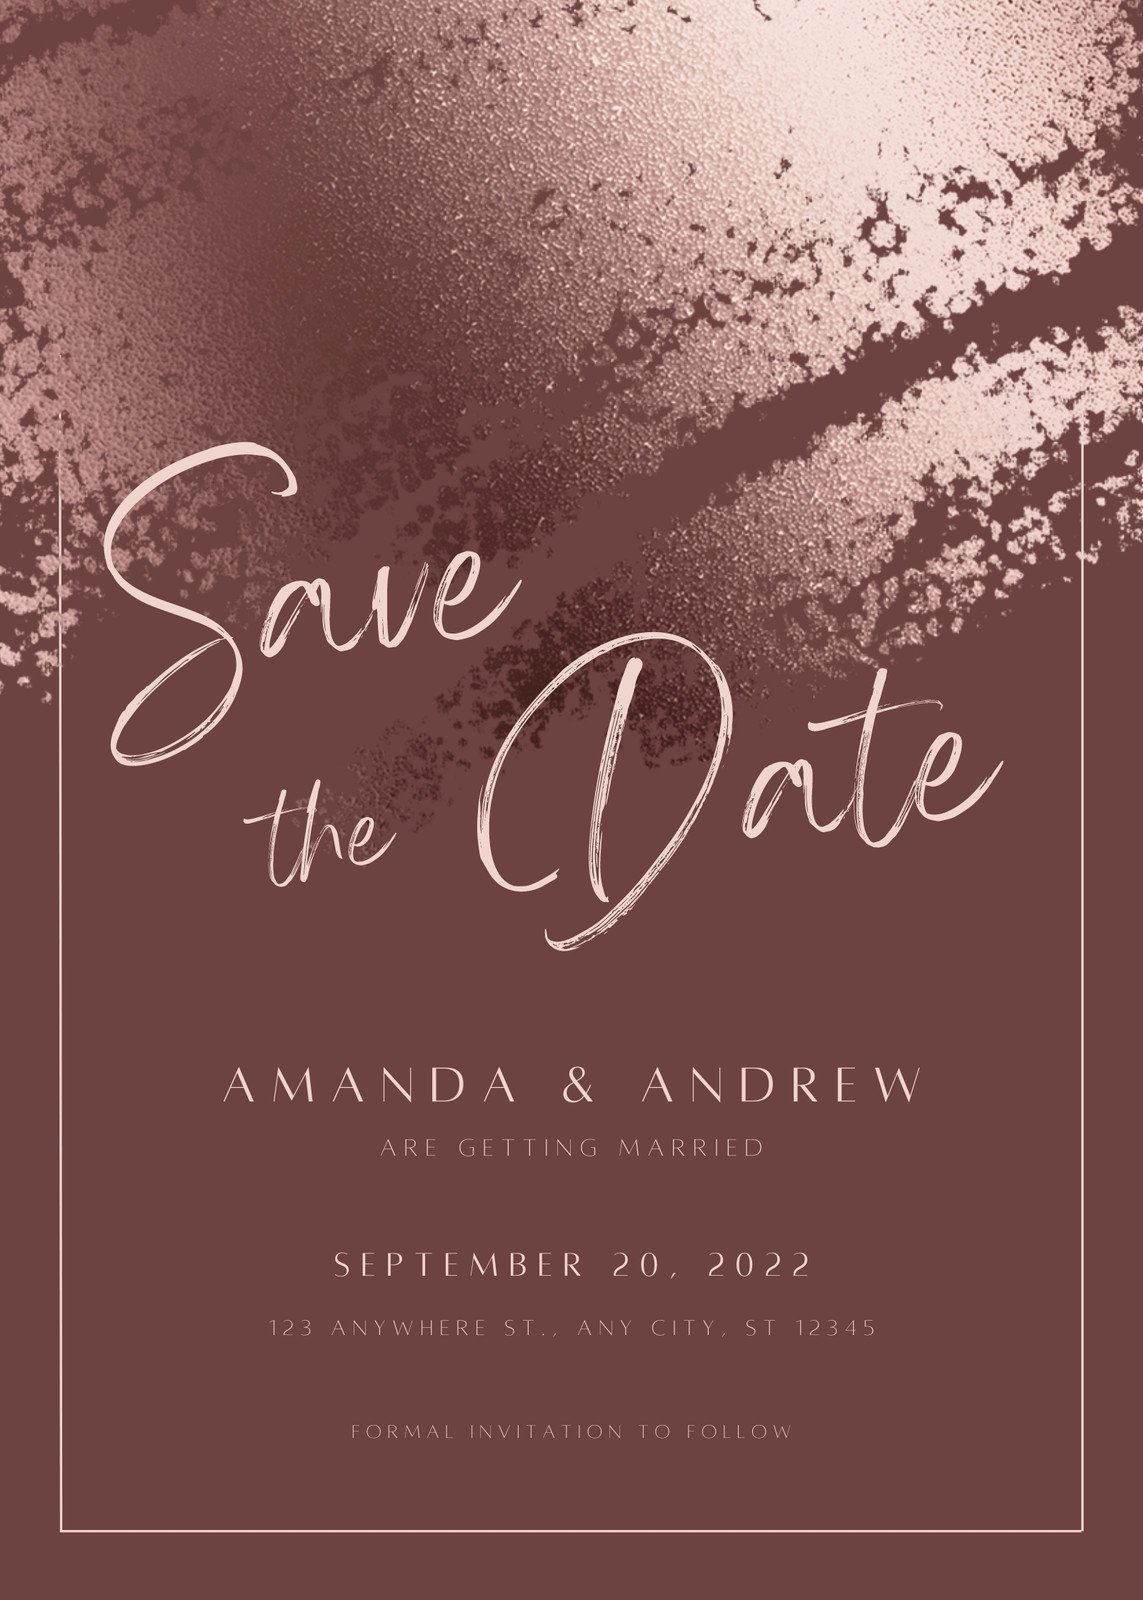 Save the Date Template Save the Date Card Template DIY Modern Minimalist  Save the Date Lola 2 Designs Incl 